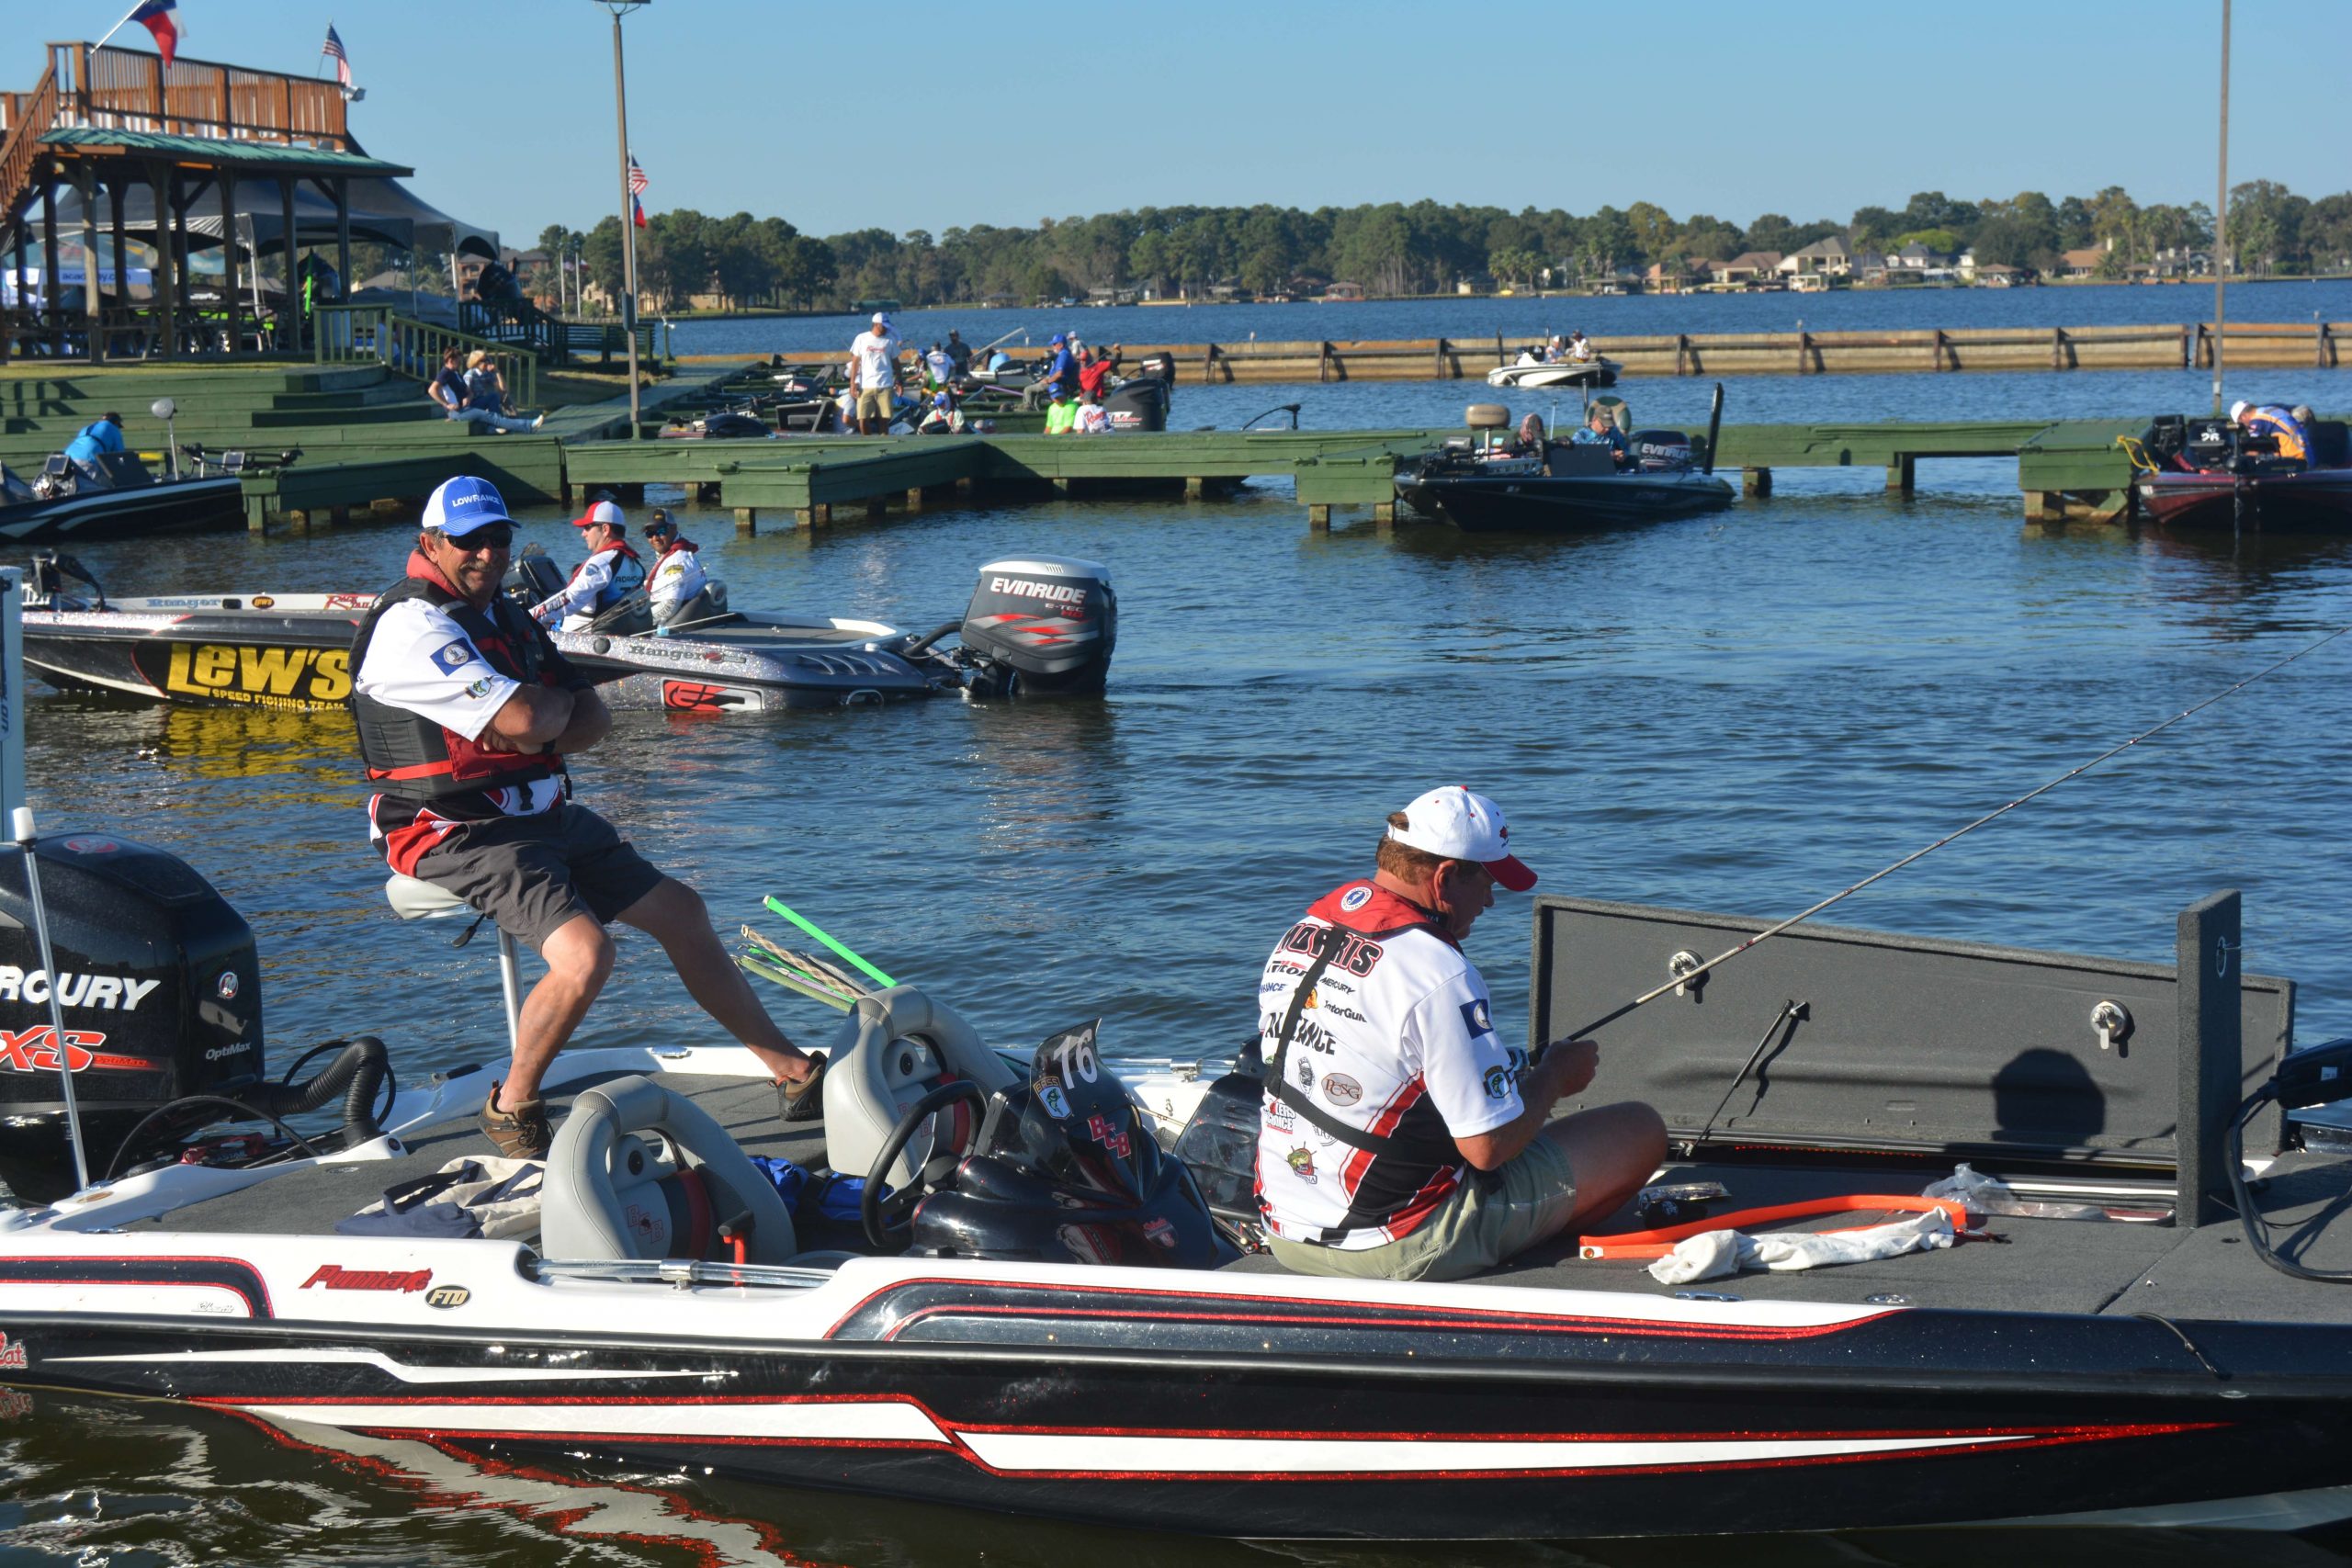 Virginia's Larry Witt and Ivan Morris finish up in the boat before leaving the water.